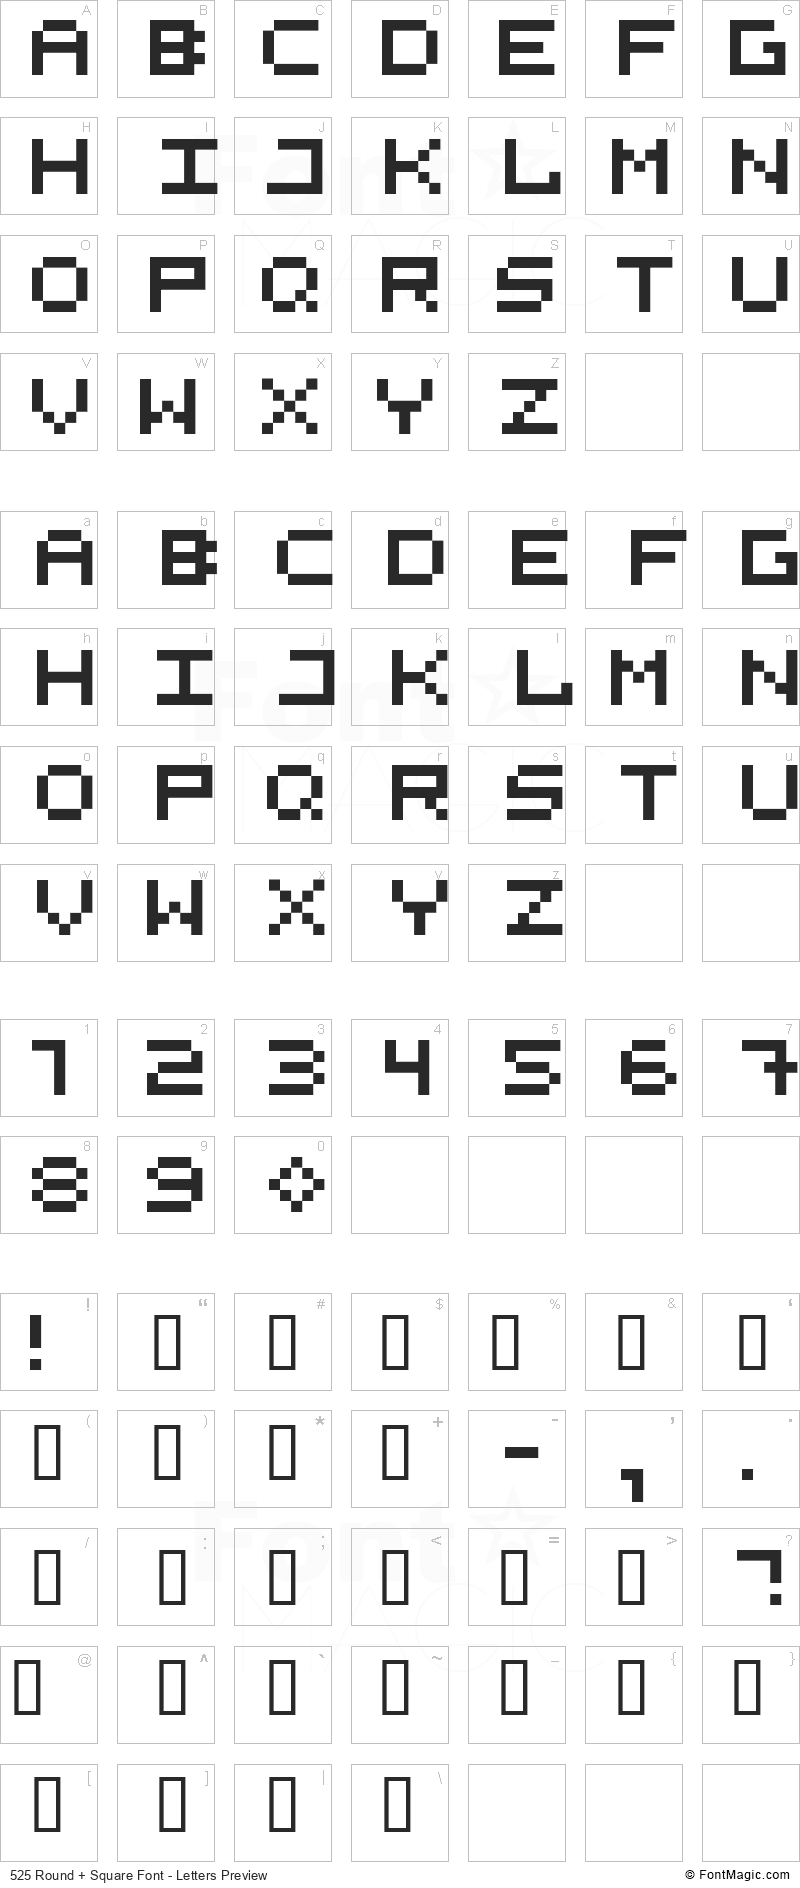 525 Round + Square Font - All Latters Preview Chart